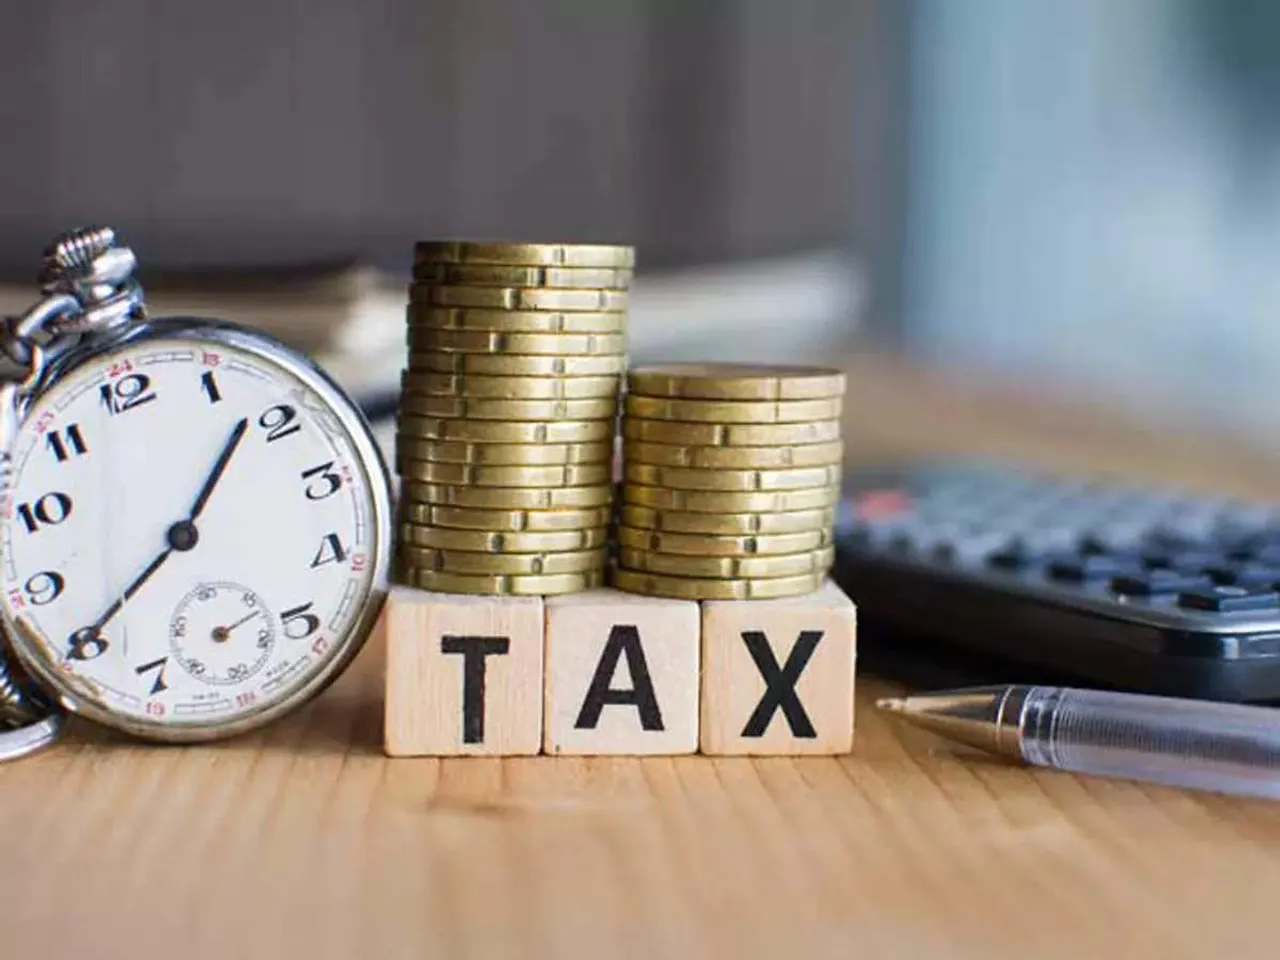 Maha: Achieved 32% of annual tax target in 3 months, says Thane civic body